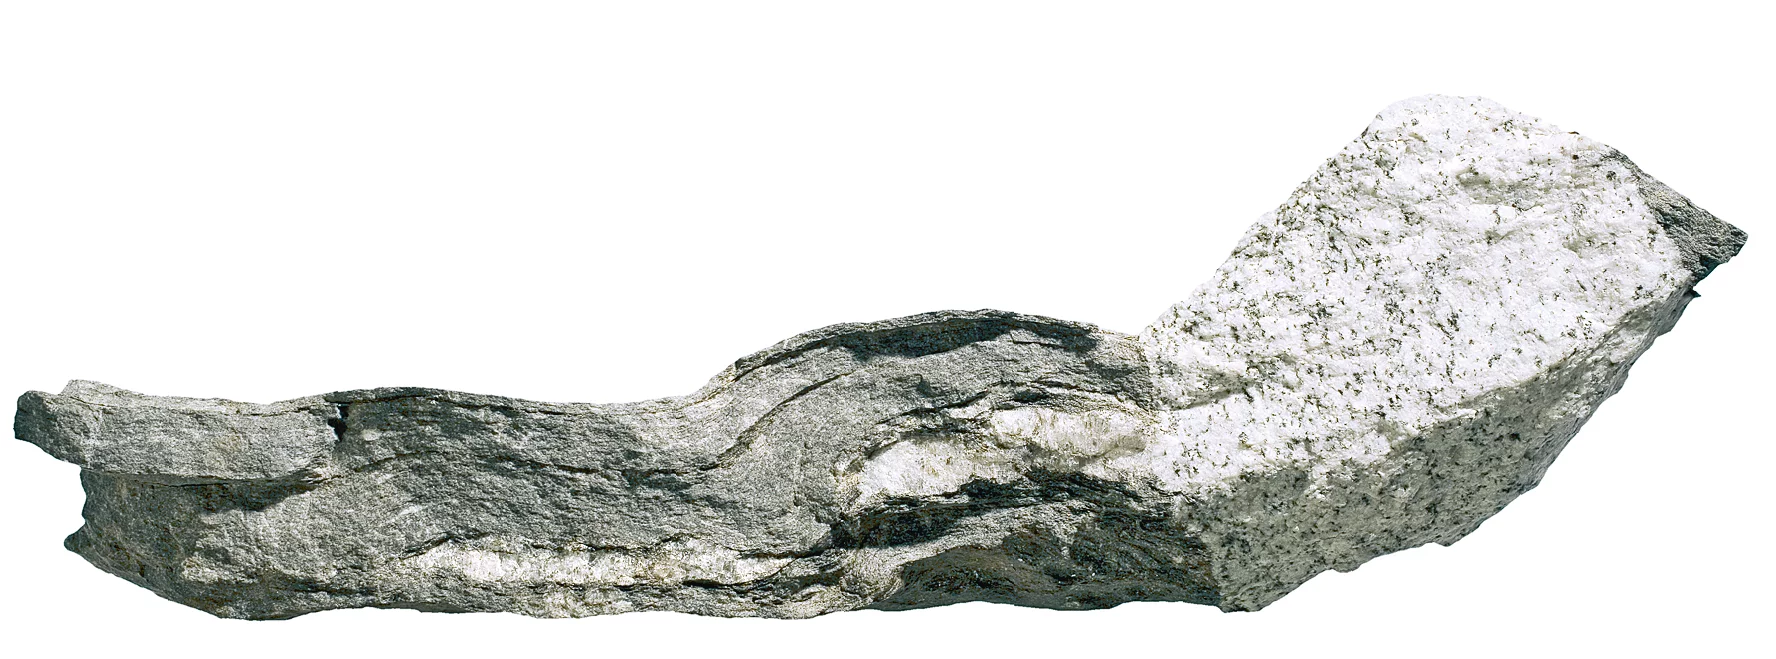 Aplite dyke (light) in gneiss (dark), Bergell (Italy). Photo: <a href="https://collections.erdw.ethz.ch" data-type="URL" data-id="https://collections.erdw.ethz.ch" target="_blank" rel="noreferrer noopener">Earth Science Collections of the Swiss Federal Institute of Technology Zürich</a>, Urs Gerber’ style=’width:100%’><figcaption></figcaption></figure><p><strong>Occurrence: </strong>Solidified magma in rock fissures<br /><strong>Origin: </strong>Rapid cooling of lava at the earth’s surface, and hence not fully crystallised<br /><strong>Main minerals (aplite):</strong> Quartz, light mica<br /><strong>Main minerals (lamprophyre):</strong> Feldspar, hornblende, pyroxene, dark mica<br /><strong>Appearance (aplite):</strong> Light and fairly fine-grained<br /><strong>Appearance (lamprophyre):</strong> Dark and fine- to medium-grained<br /><strong>Properties:</strong> Hard, easily workable<br /><strong>Uses:</strong> Limited use in Switzerland</p><hr class="wp-block-separator" /><h2 class="wp-block-custom-heading" id="sediment">2. Sedimentary rocks</h2><p>Sedimentary rocks are formed from materials (e.g. eroded material from mountains, mud, sand or salt) deposited on land or in the water where they gradually solidify. The originally loose components are cemented together with time to form solid rocks. Sedimentary rocks are often layered. Conglomerates, such as nagelfluh, sandstone and clay, consist of eroded material from mountains. Limestones are formed mainly from shells and other hard parts of sea creatures. Chemically formed sediments, such as gypsum and rock salt, are formed when marine and lacustrine waters evaporate.</p><figure class=